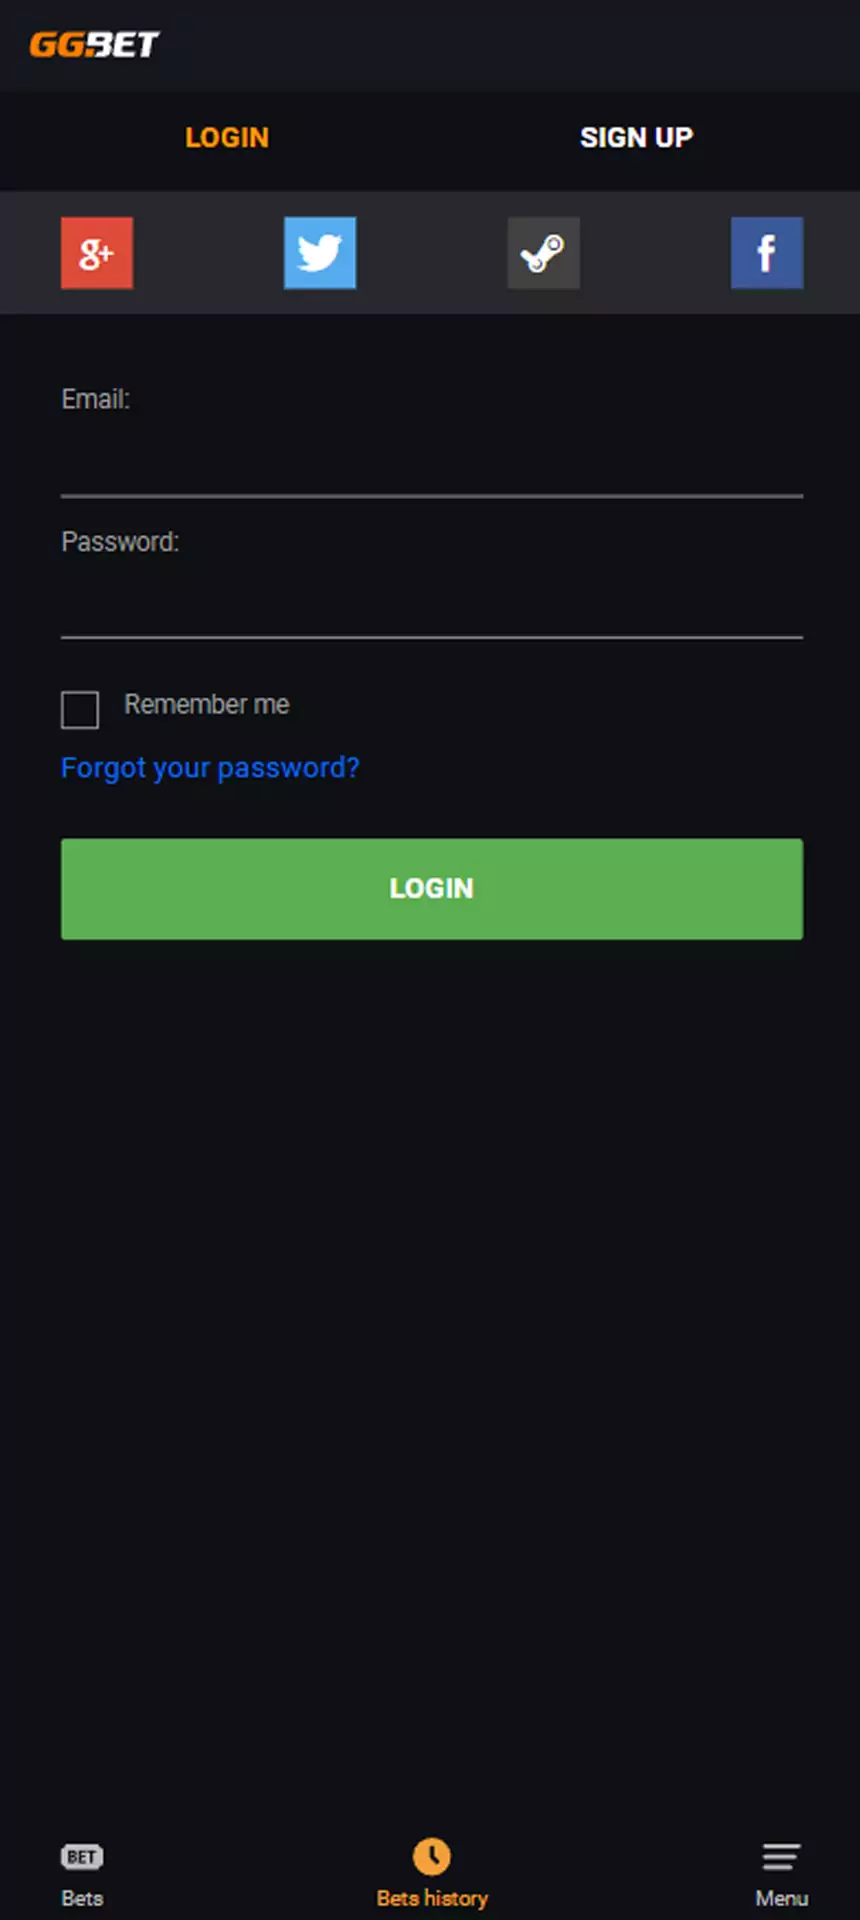 Log in for proceeding.